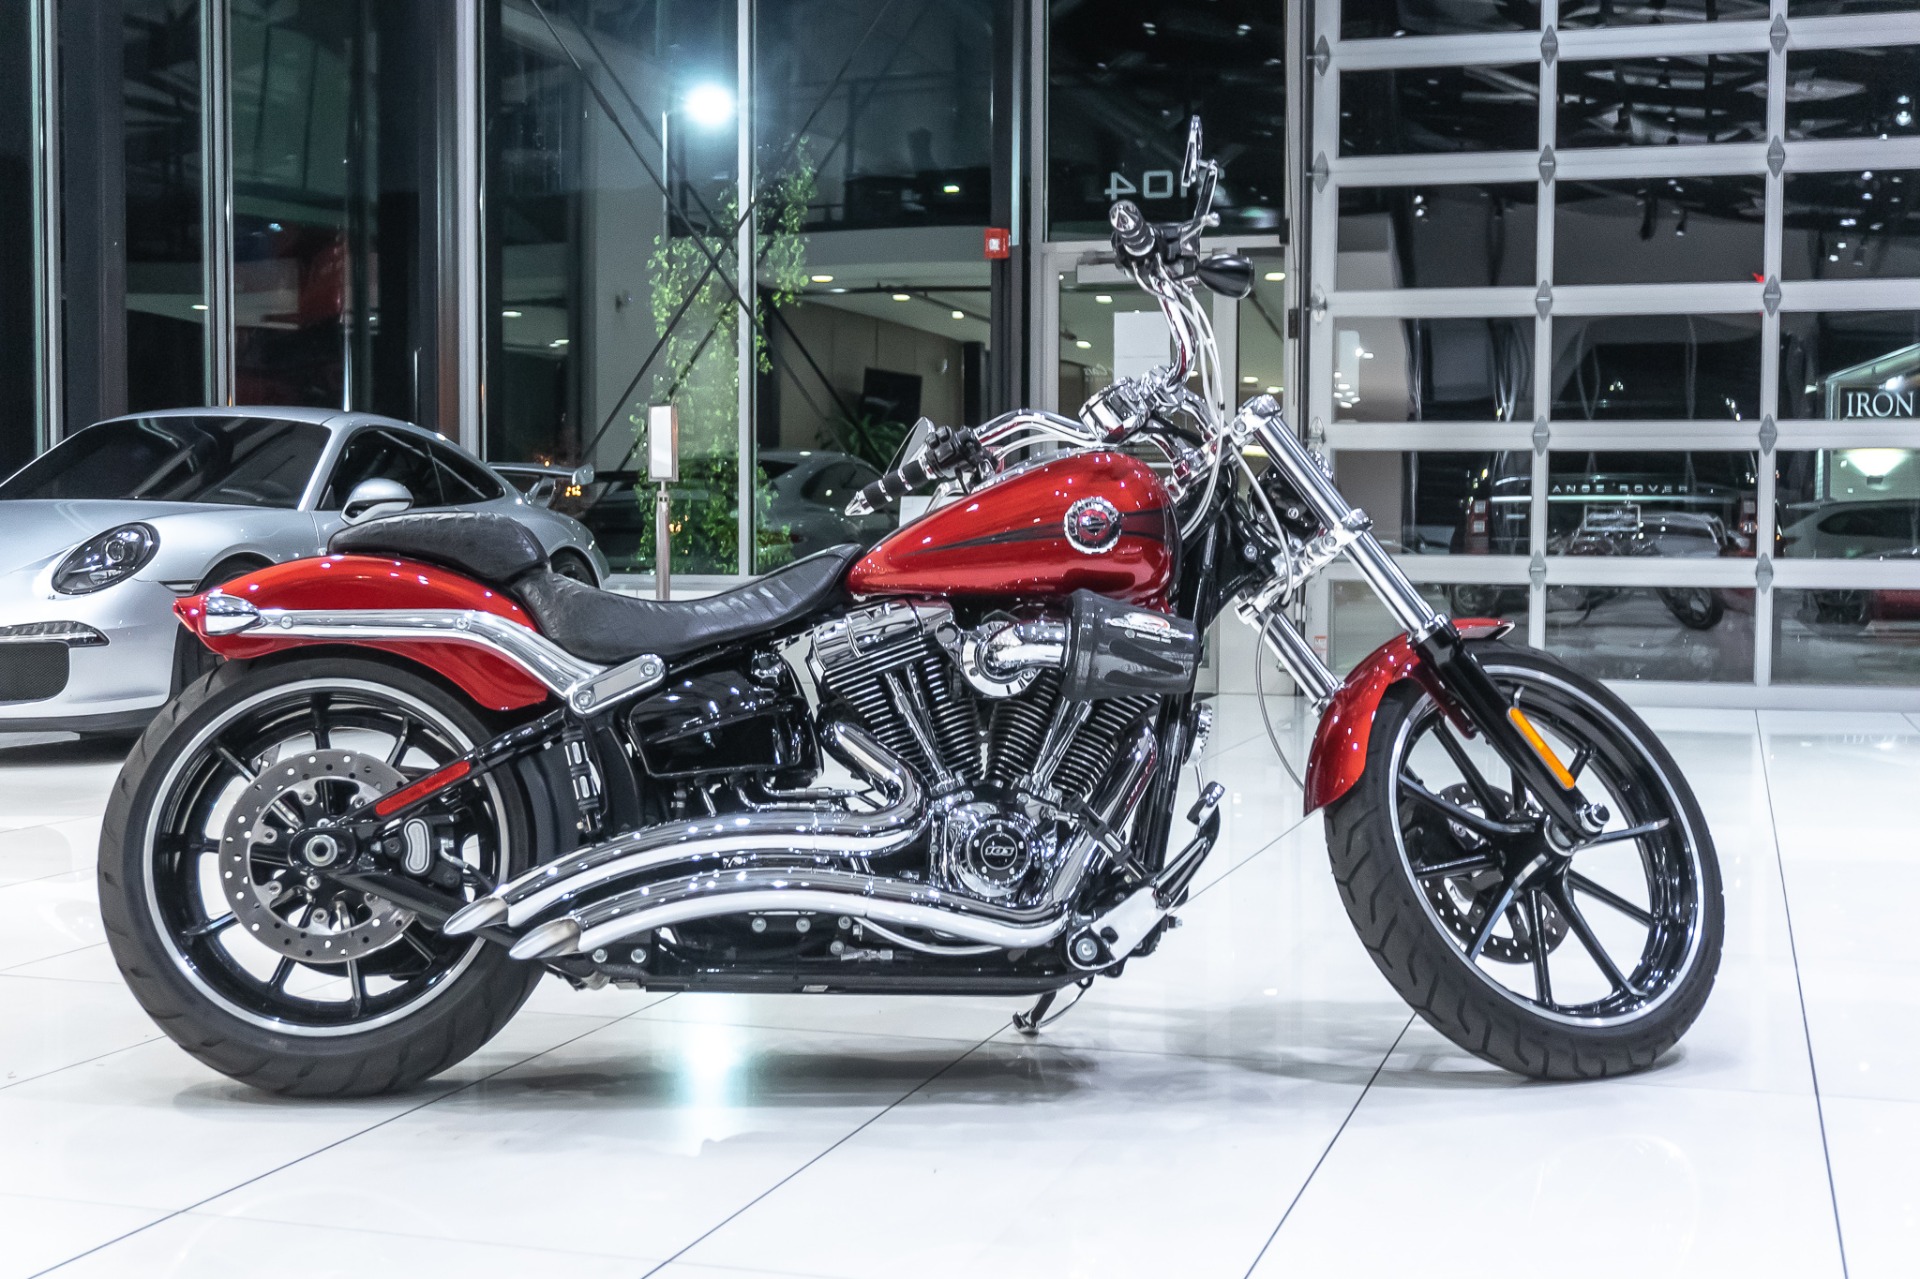 Used-2013-Harley-Davidson-FXSB-Breakout-Softail-Only-1k-Miles